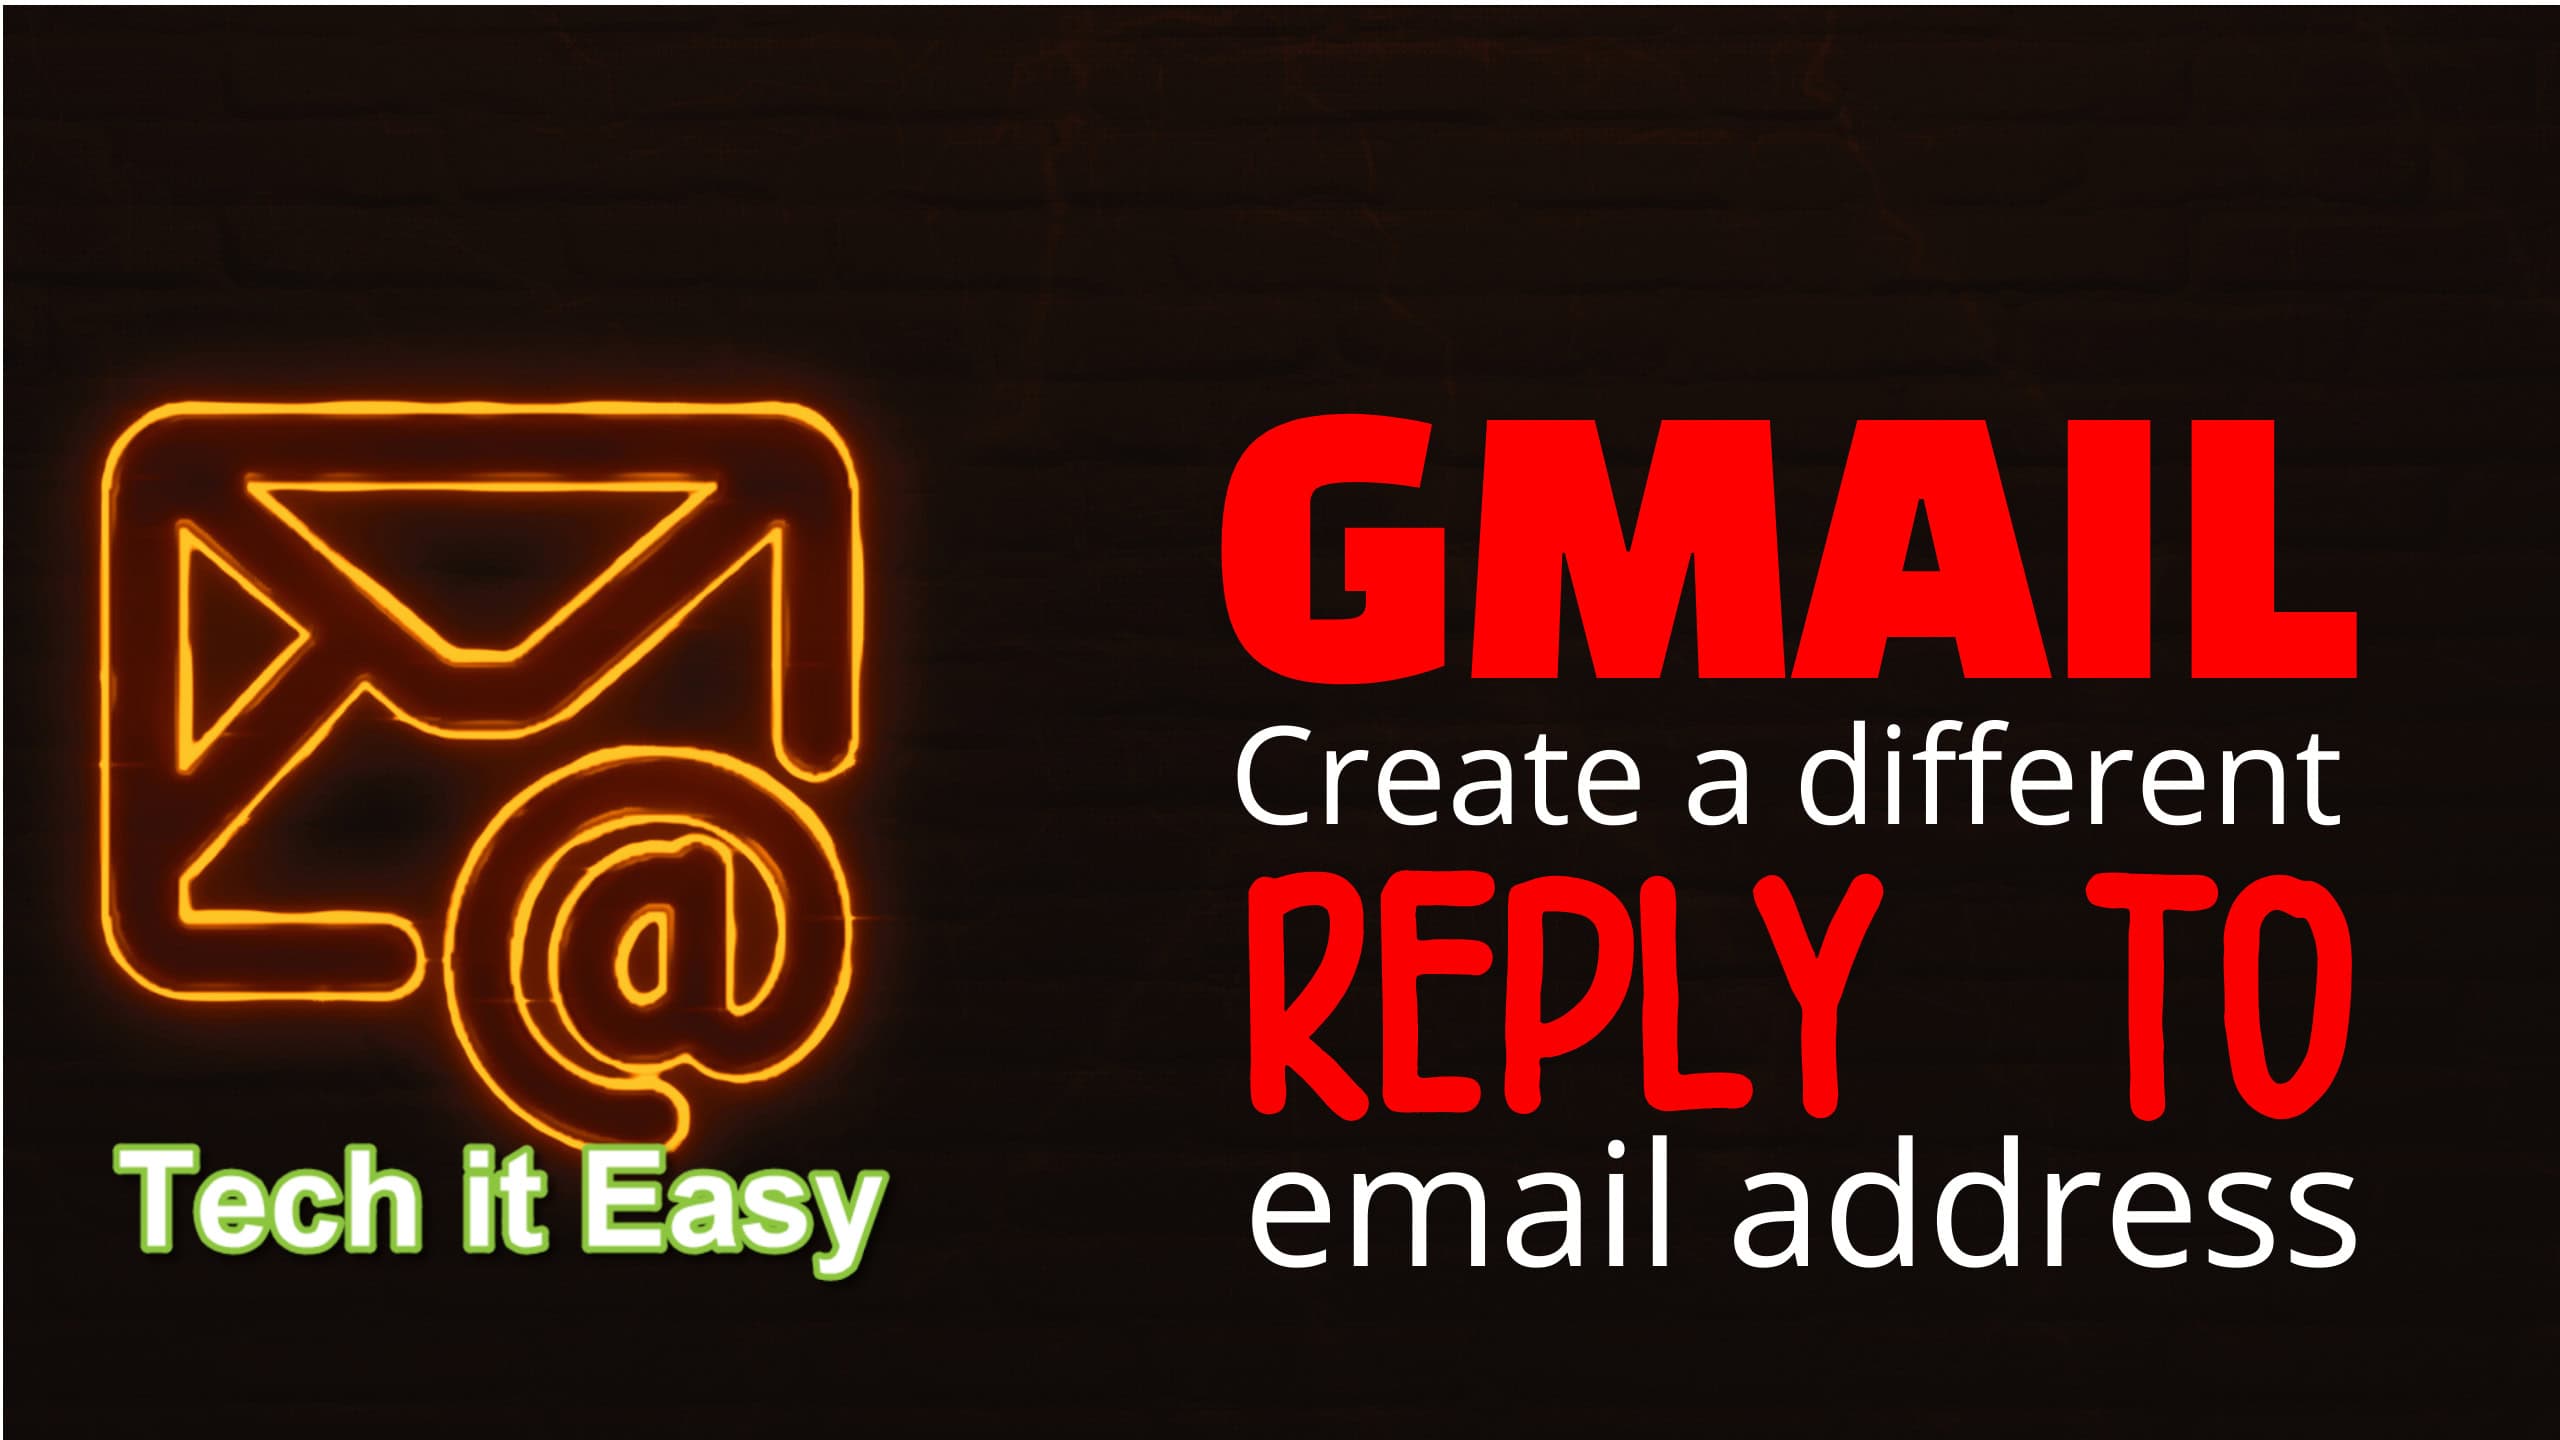 Gmail-Create-Different-Reply-To-Address